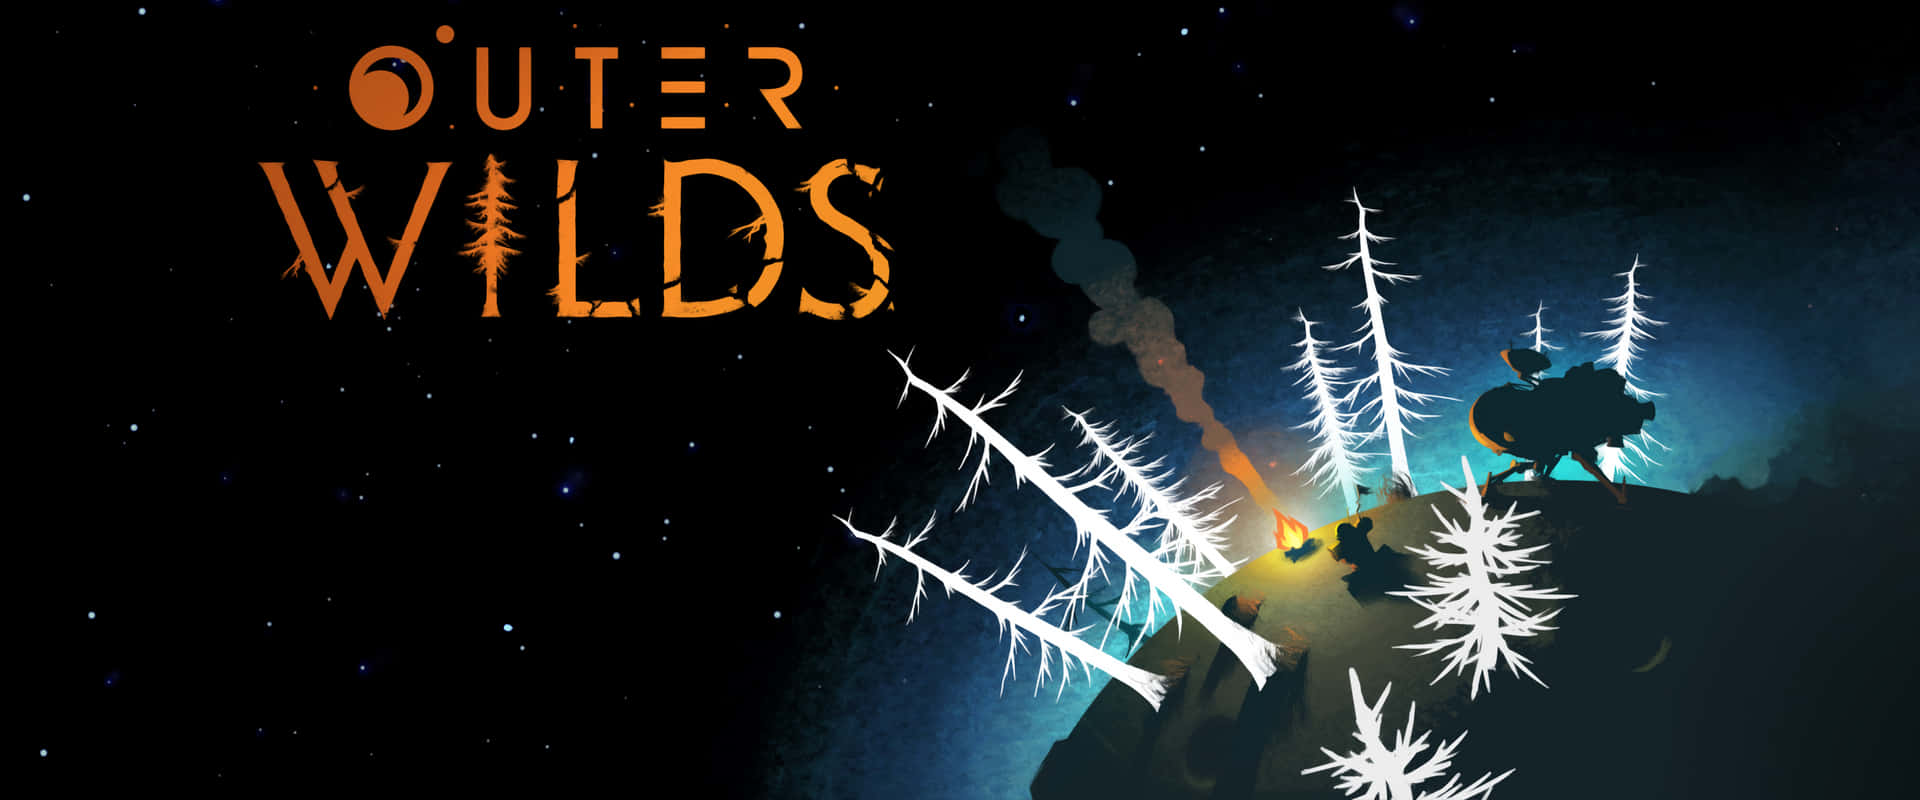 White Trees In Outer Wilds Forest Wallpaper